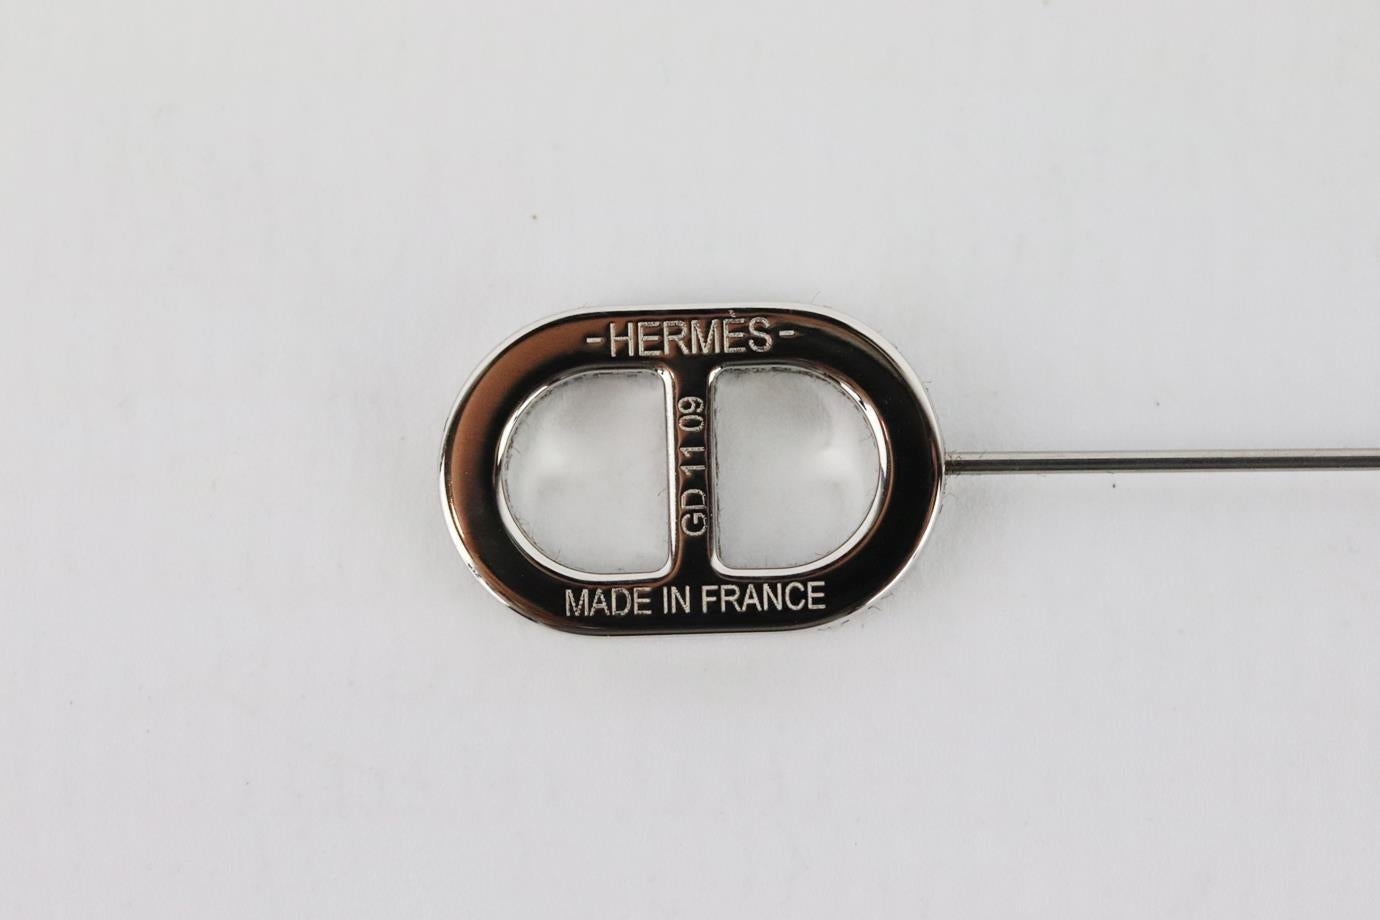 This hat pin by Hermès in silver-tone metal with Chaine d'Ancre detail and stainless steel pin. Silver stainless-steel. Push lock fastening at bottom. Comes with dustbag and box. Dimensions: L 2.5 x W 0.4 inches
